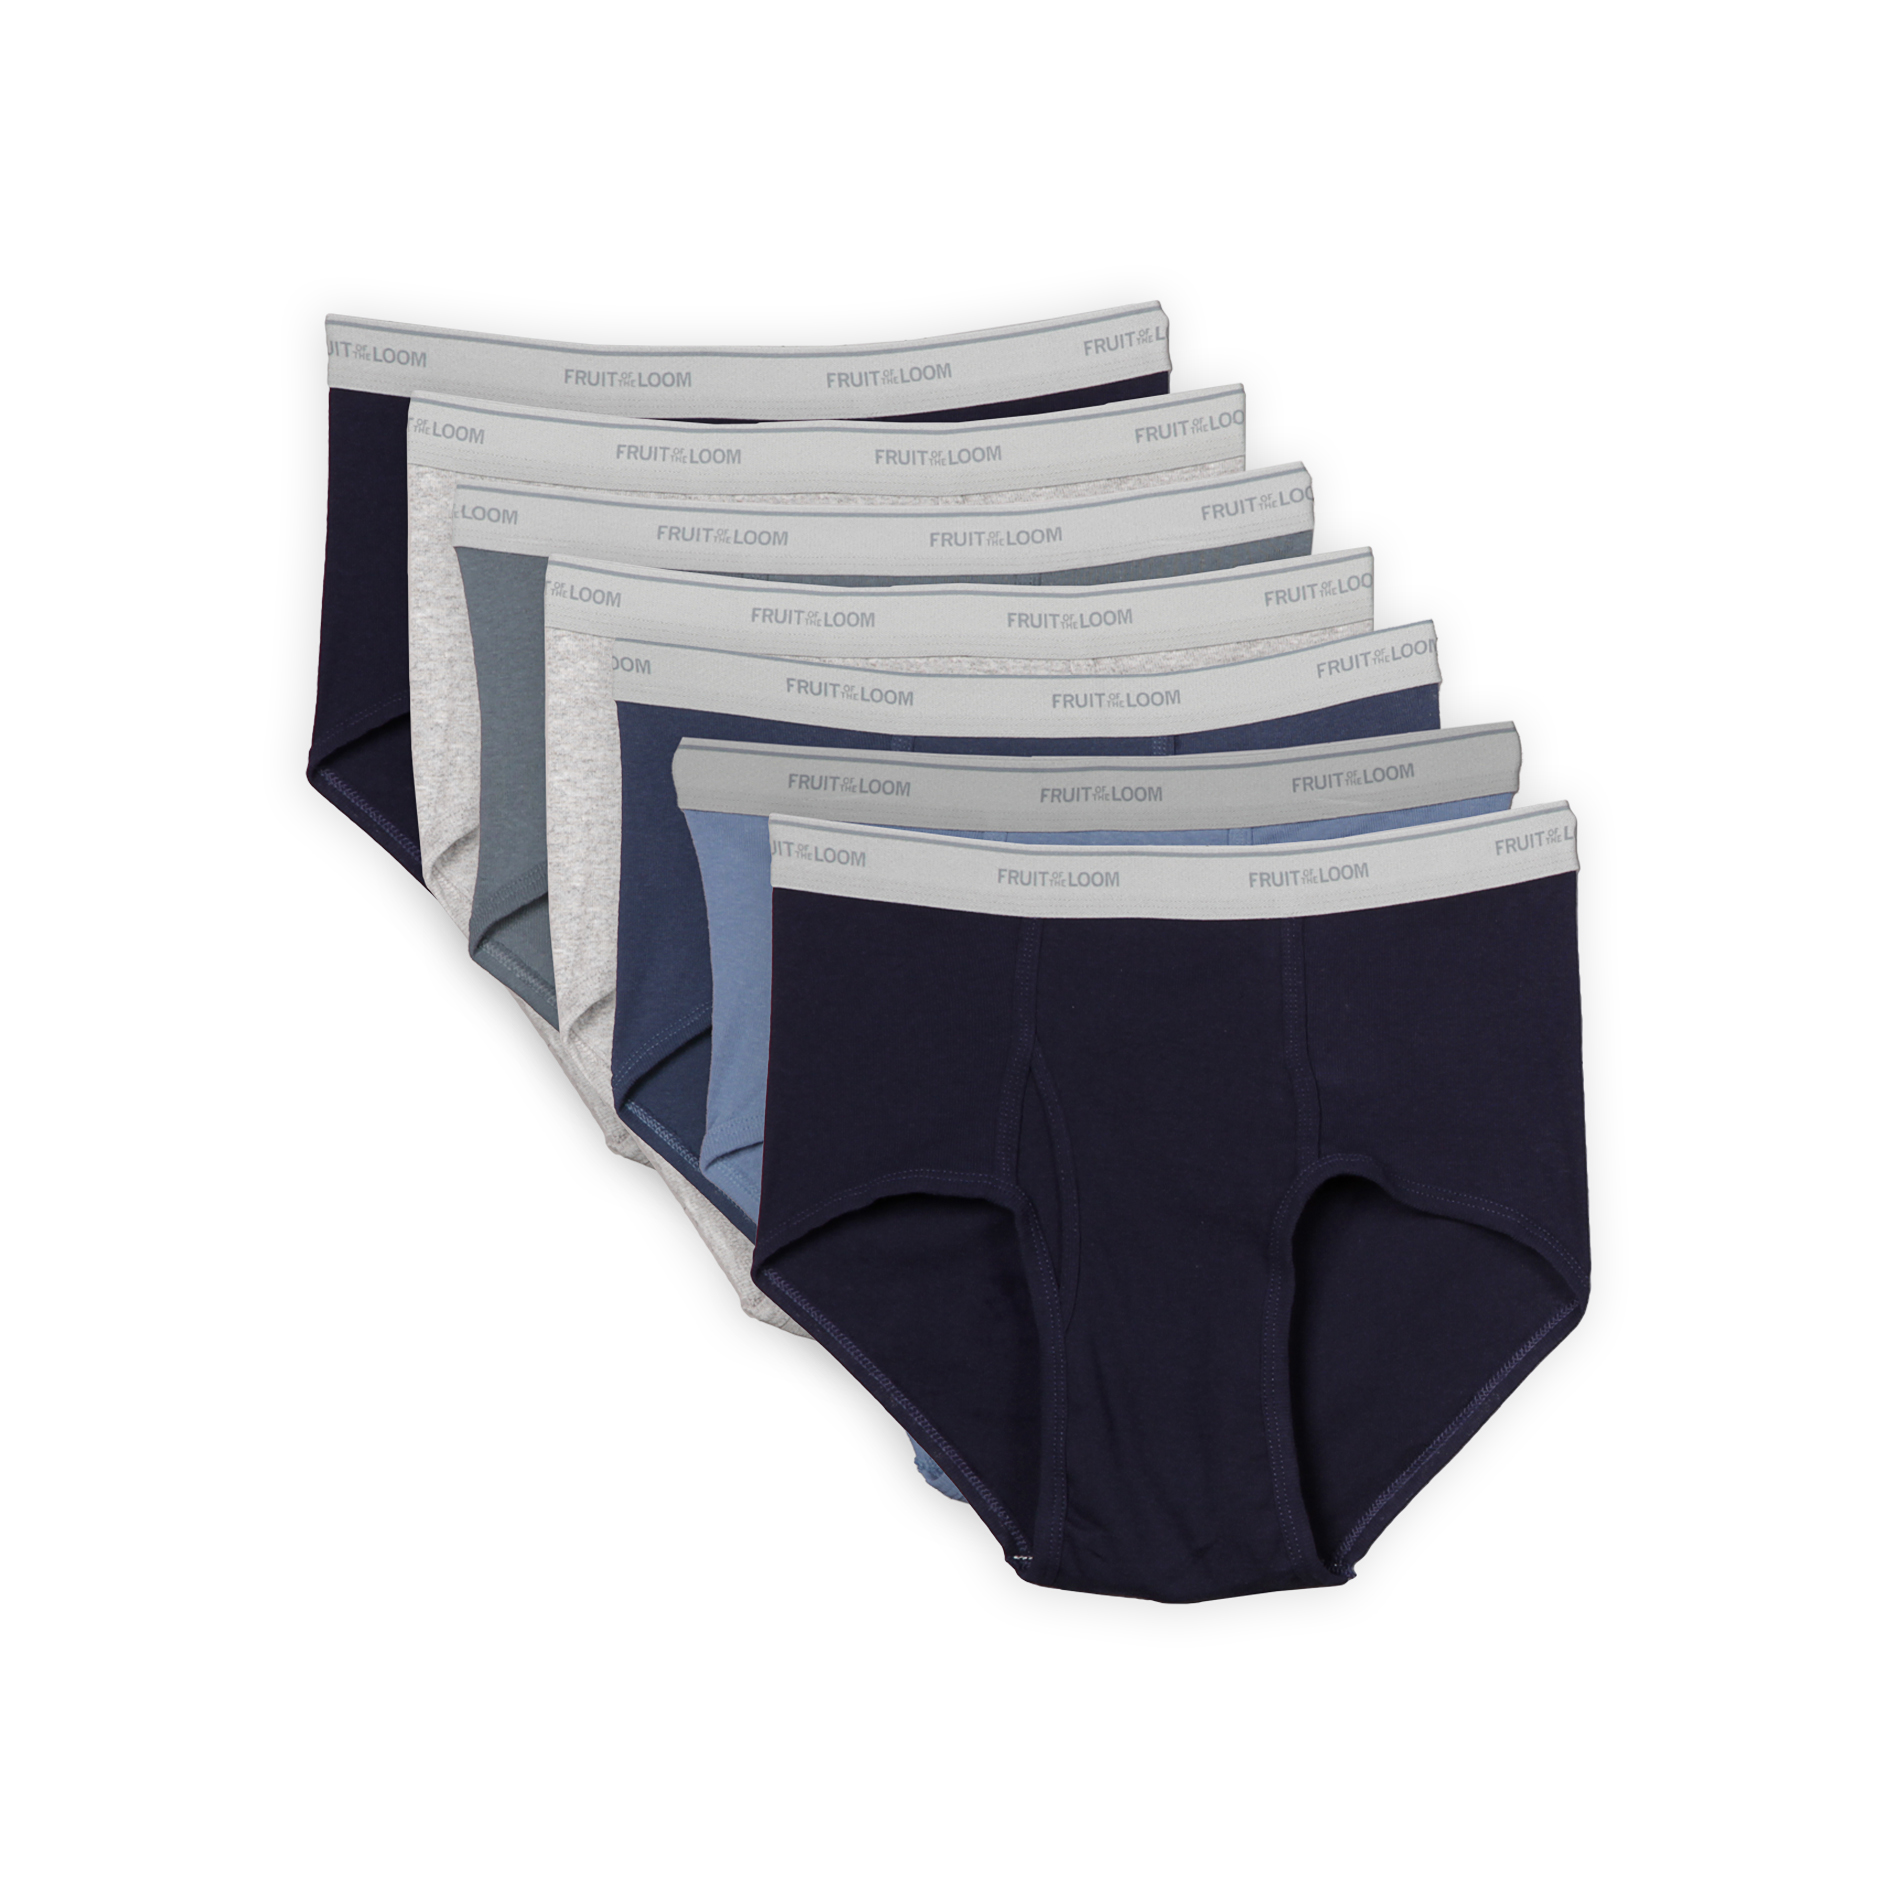 Fruit of the Loom Men's 7-Pack Fashion Briefs